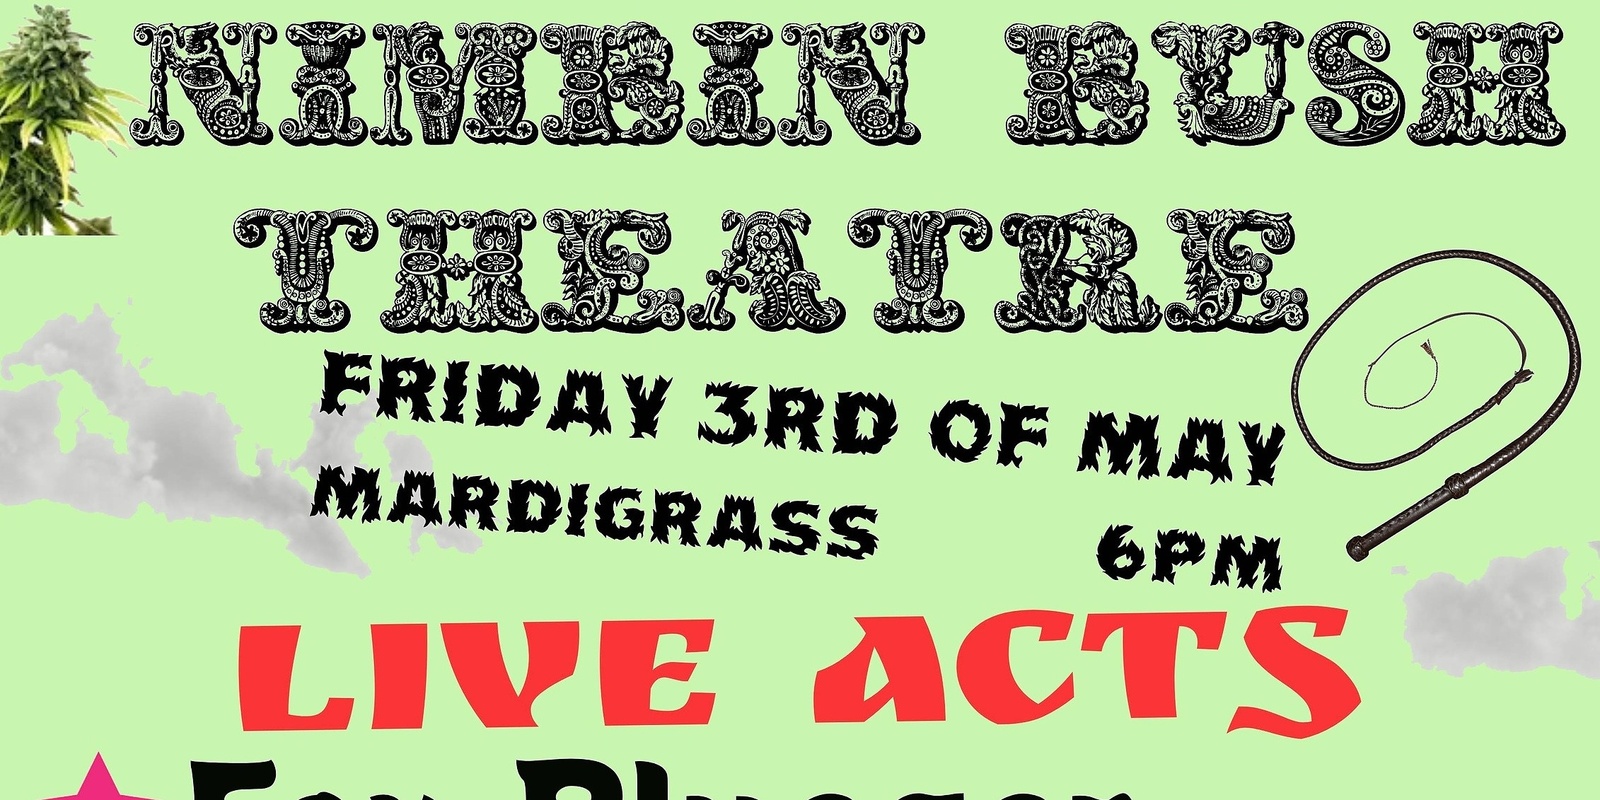 Banner image for 8 ACTS/BANDS/DRAG @ Nimbin Bush Theatre - Friday 3rd May 5pm- 